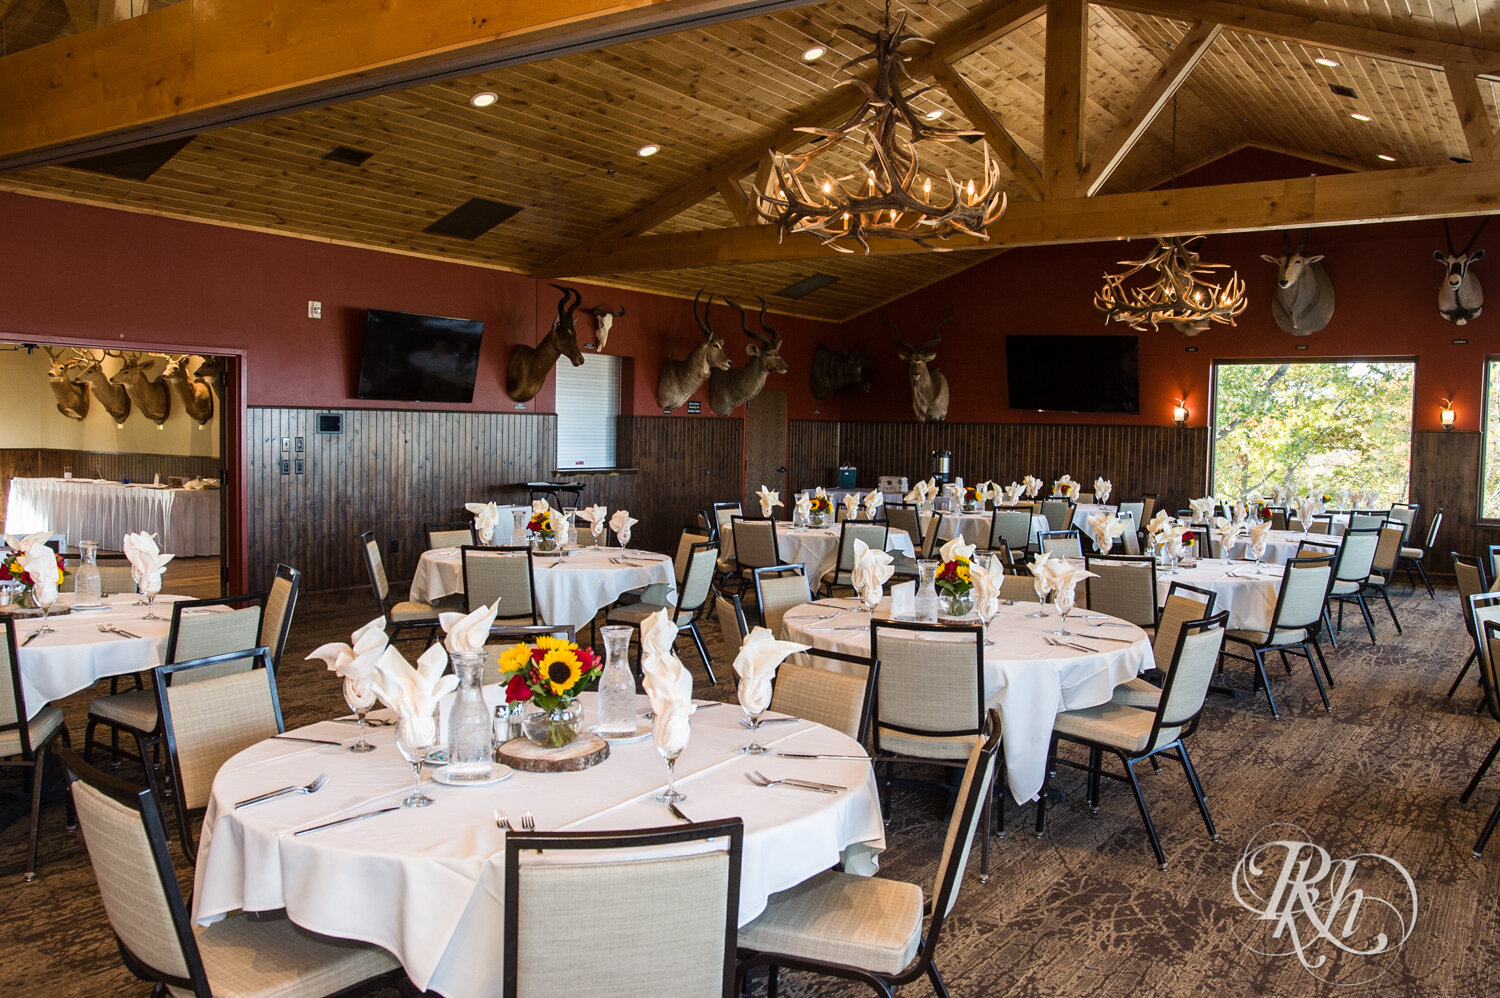 Indoor wedding reception setup with sunflowers at Minnesota Horse and Hunt Club in Prior Lake, Minnesota.